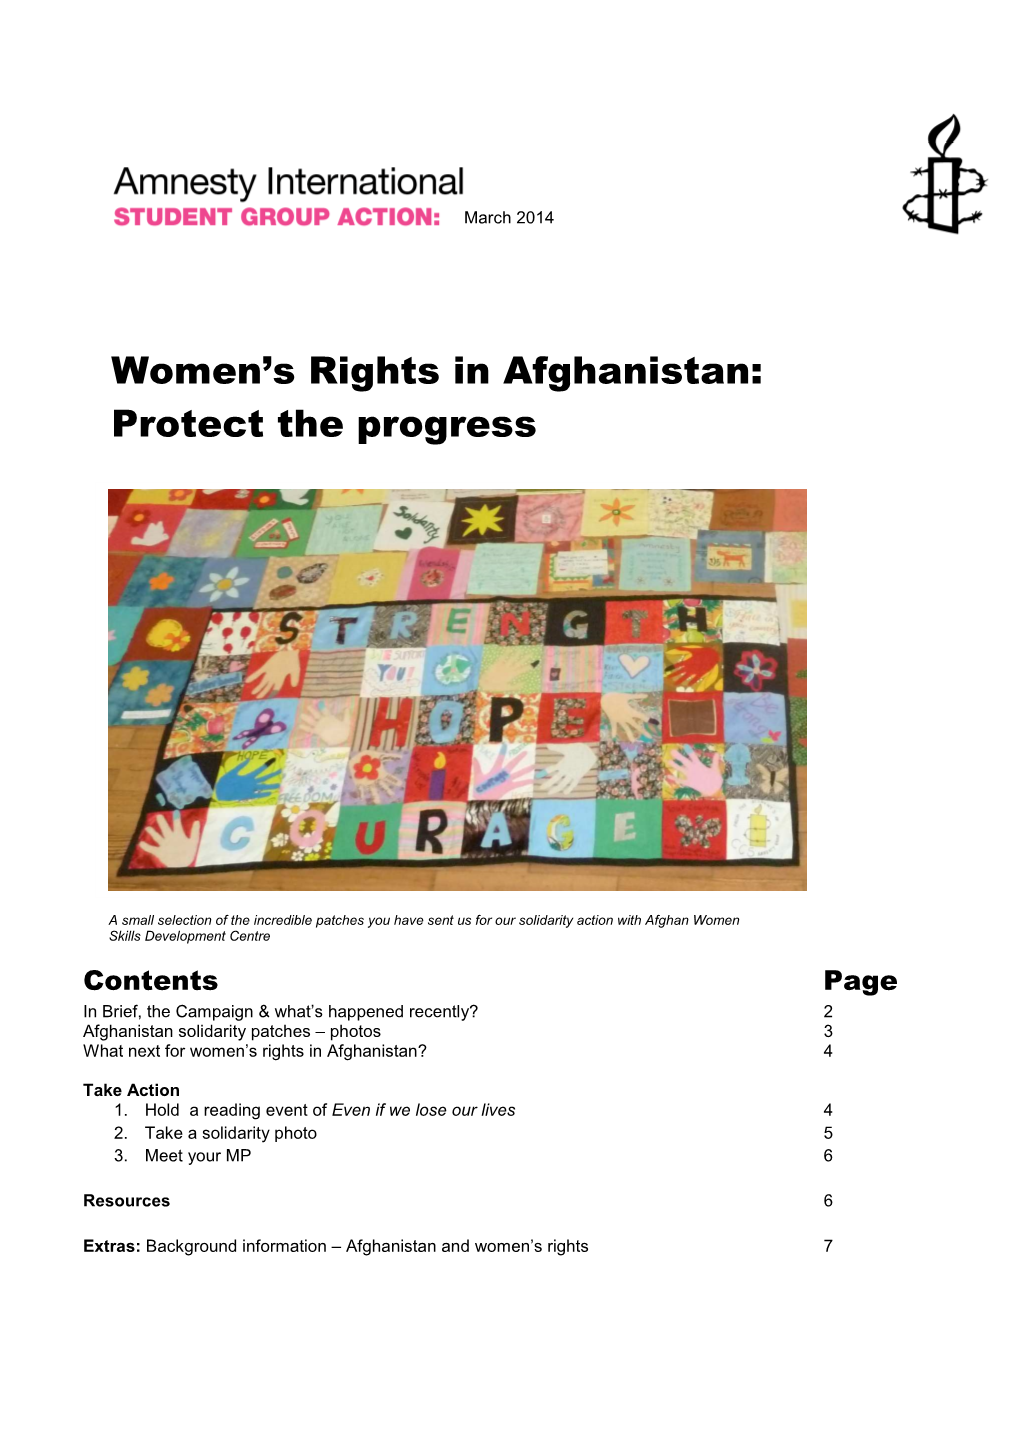 Women's Rights in Afghanistan: Protect the Progress